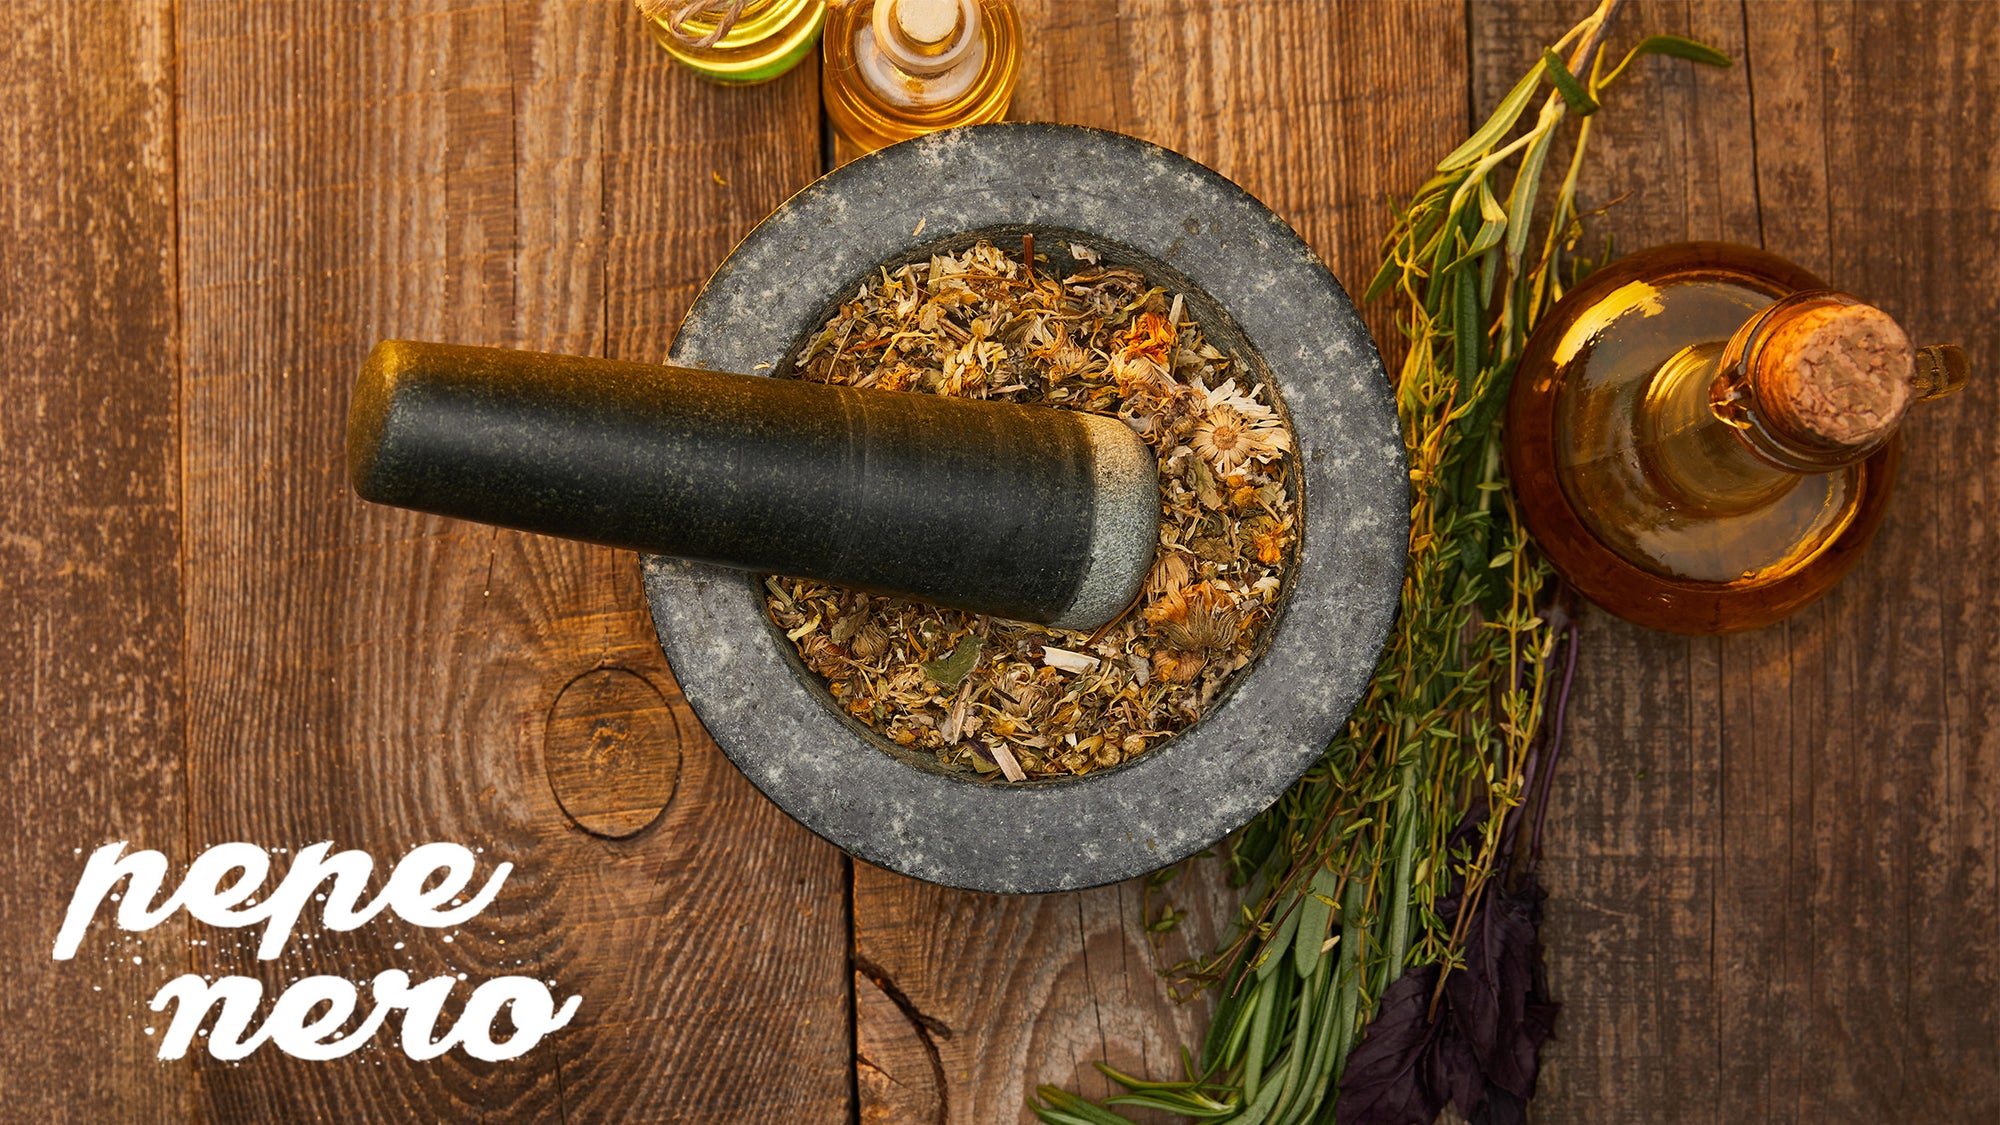 How to Season a Mortar and Pestle